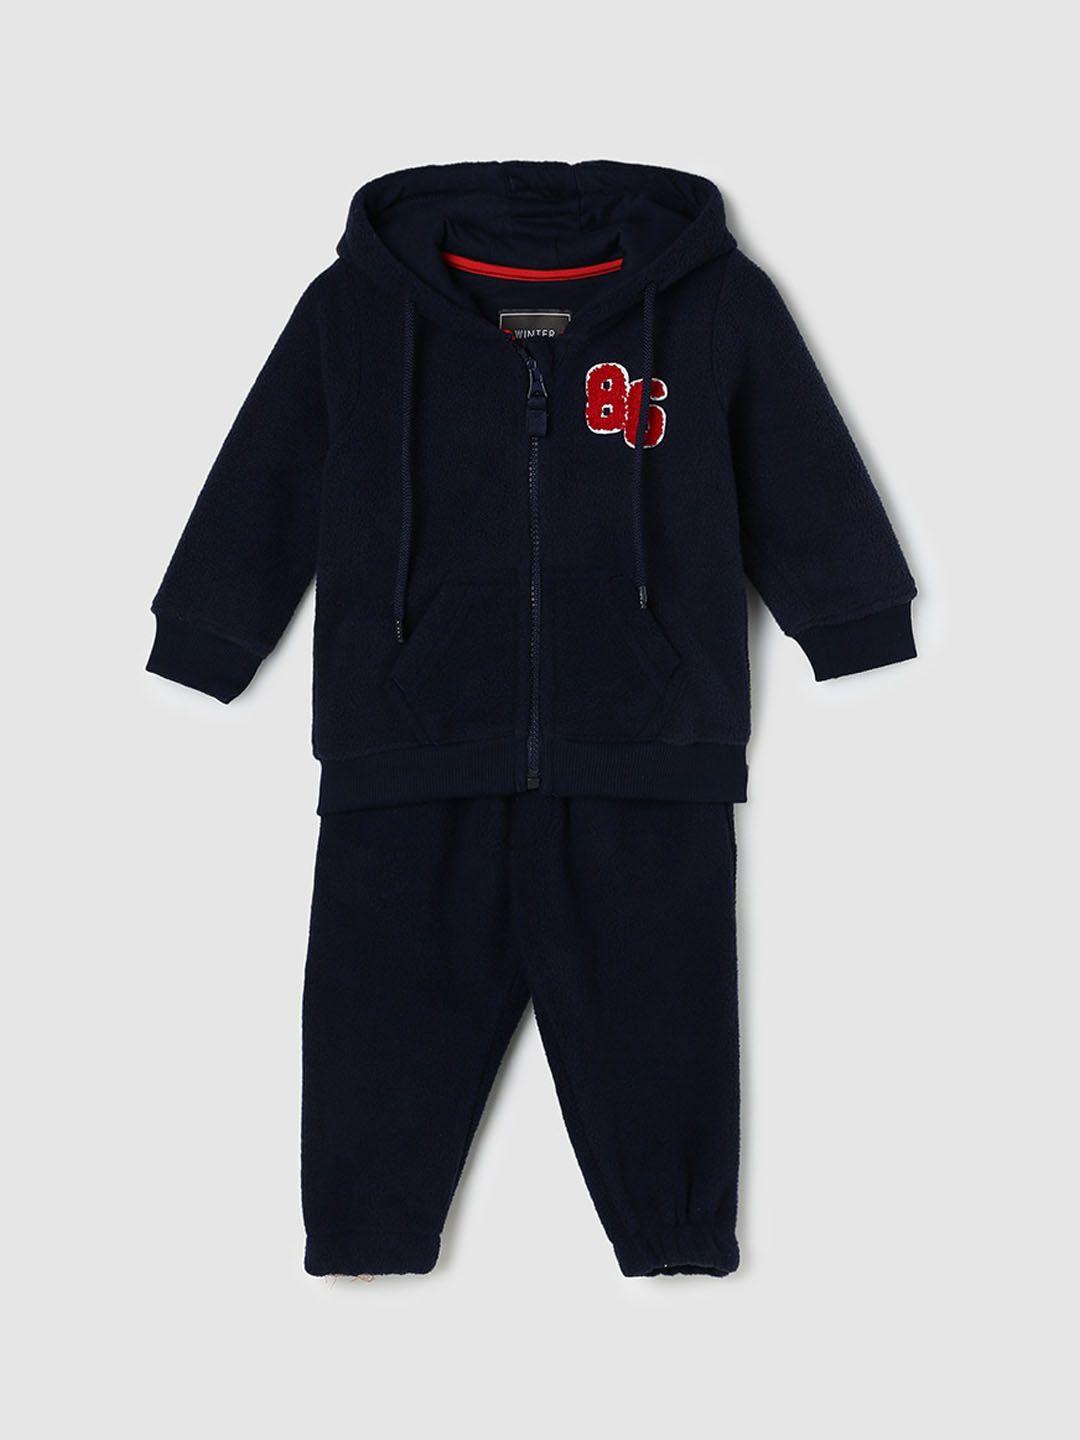 max boys blue & red night suit